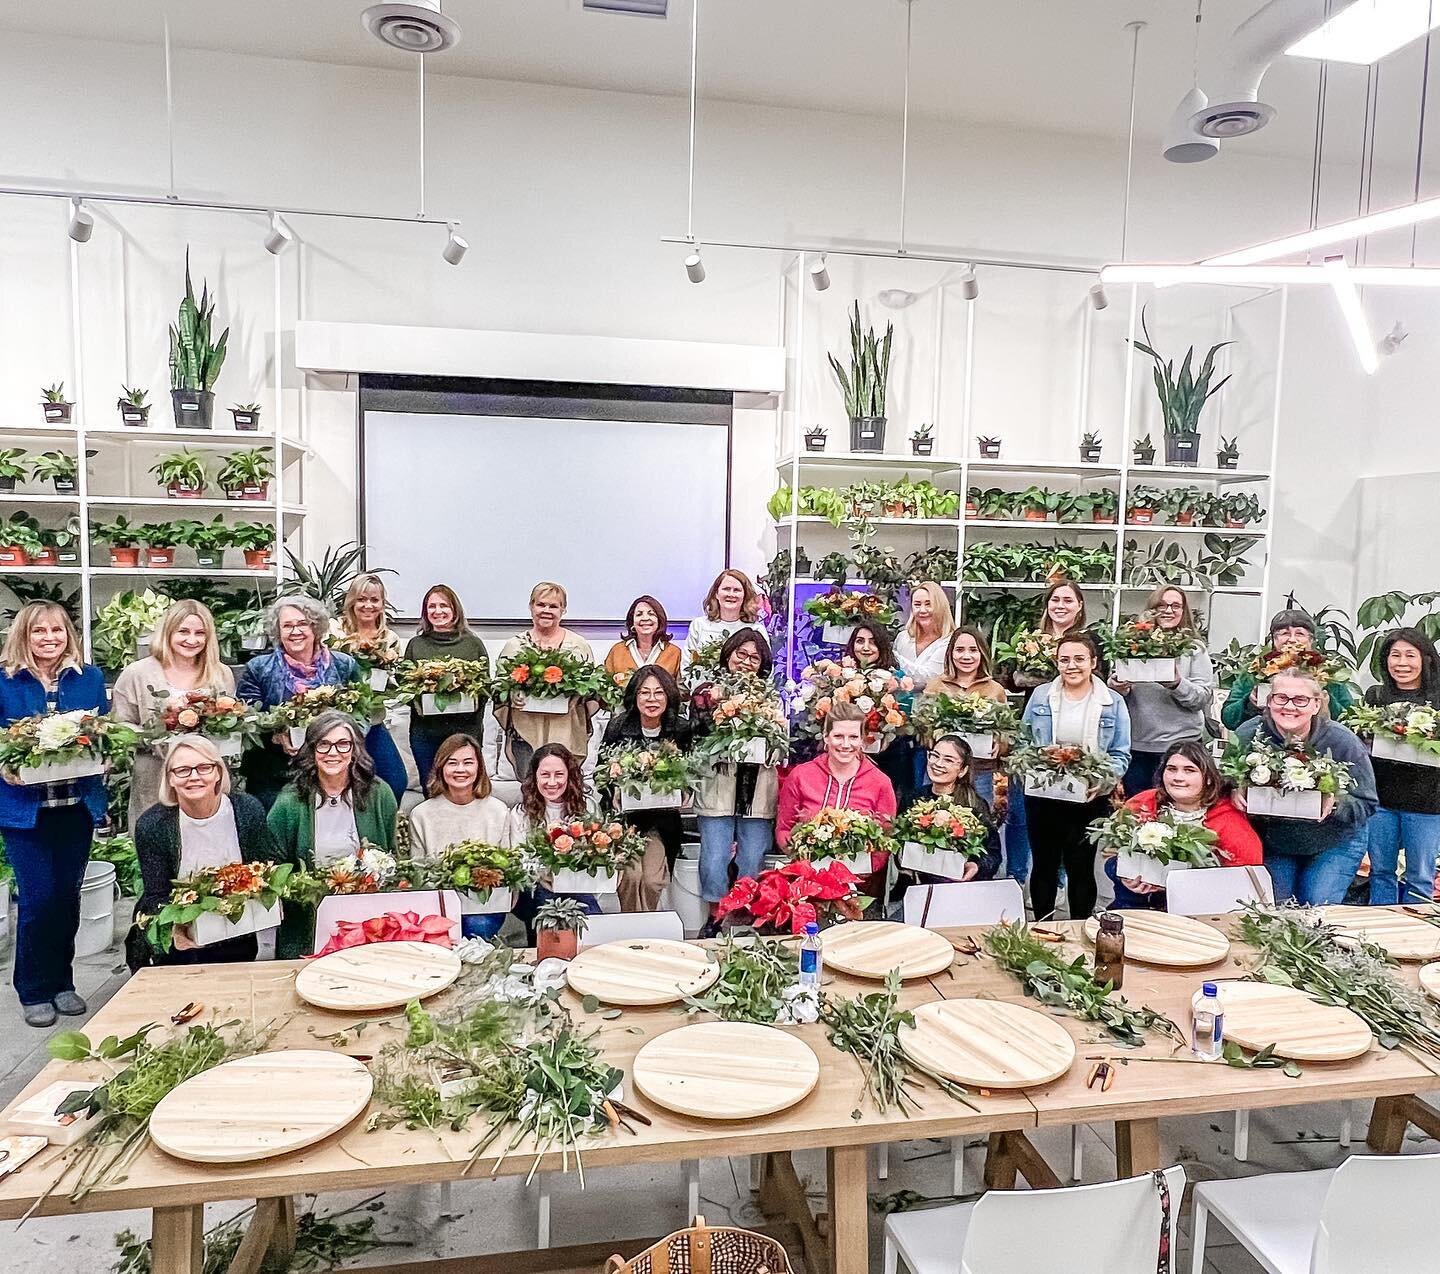 Incredible to see everyone&rsquo;s vision come to life for their Thanksgiving tablescape 🤩 Another great floral arranging workshop with Kelli 💐

There&rsquo;s still a couple spots left for our holiday floral arranging one on 12/22!